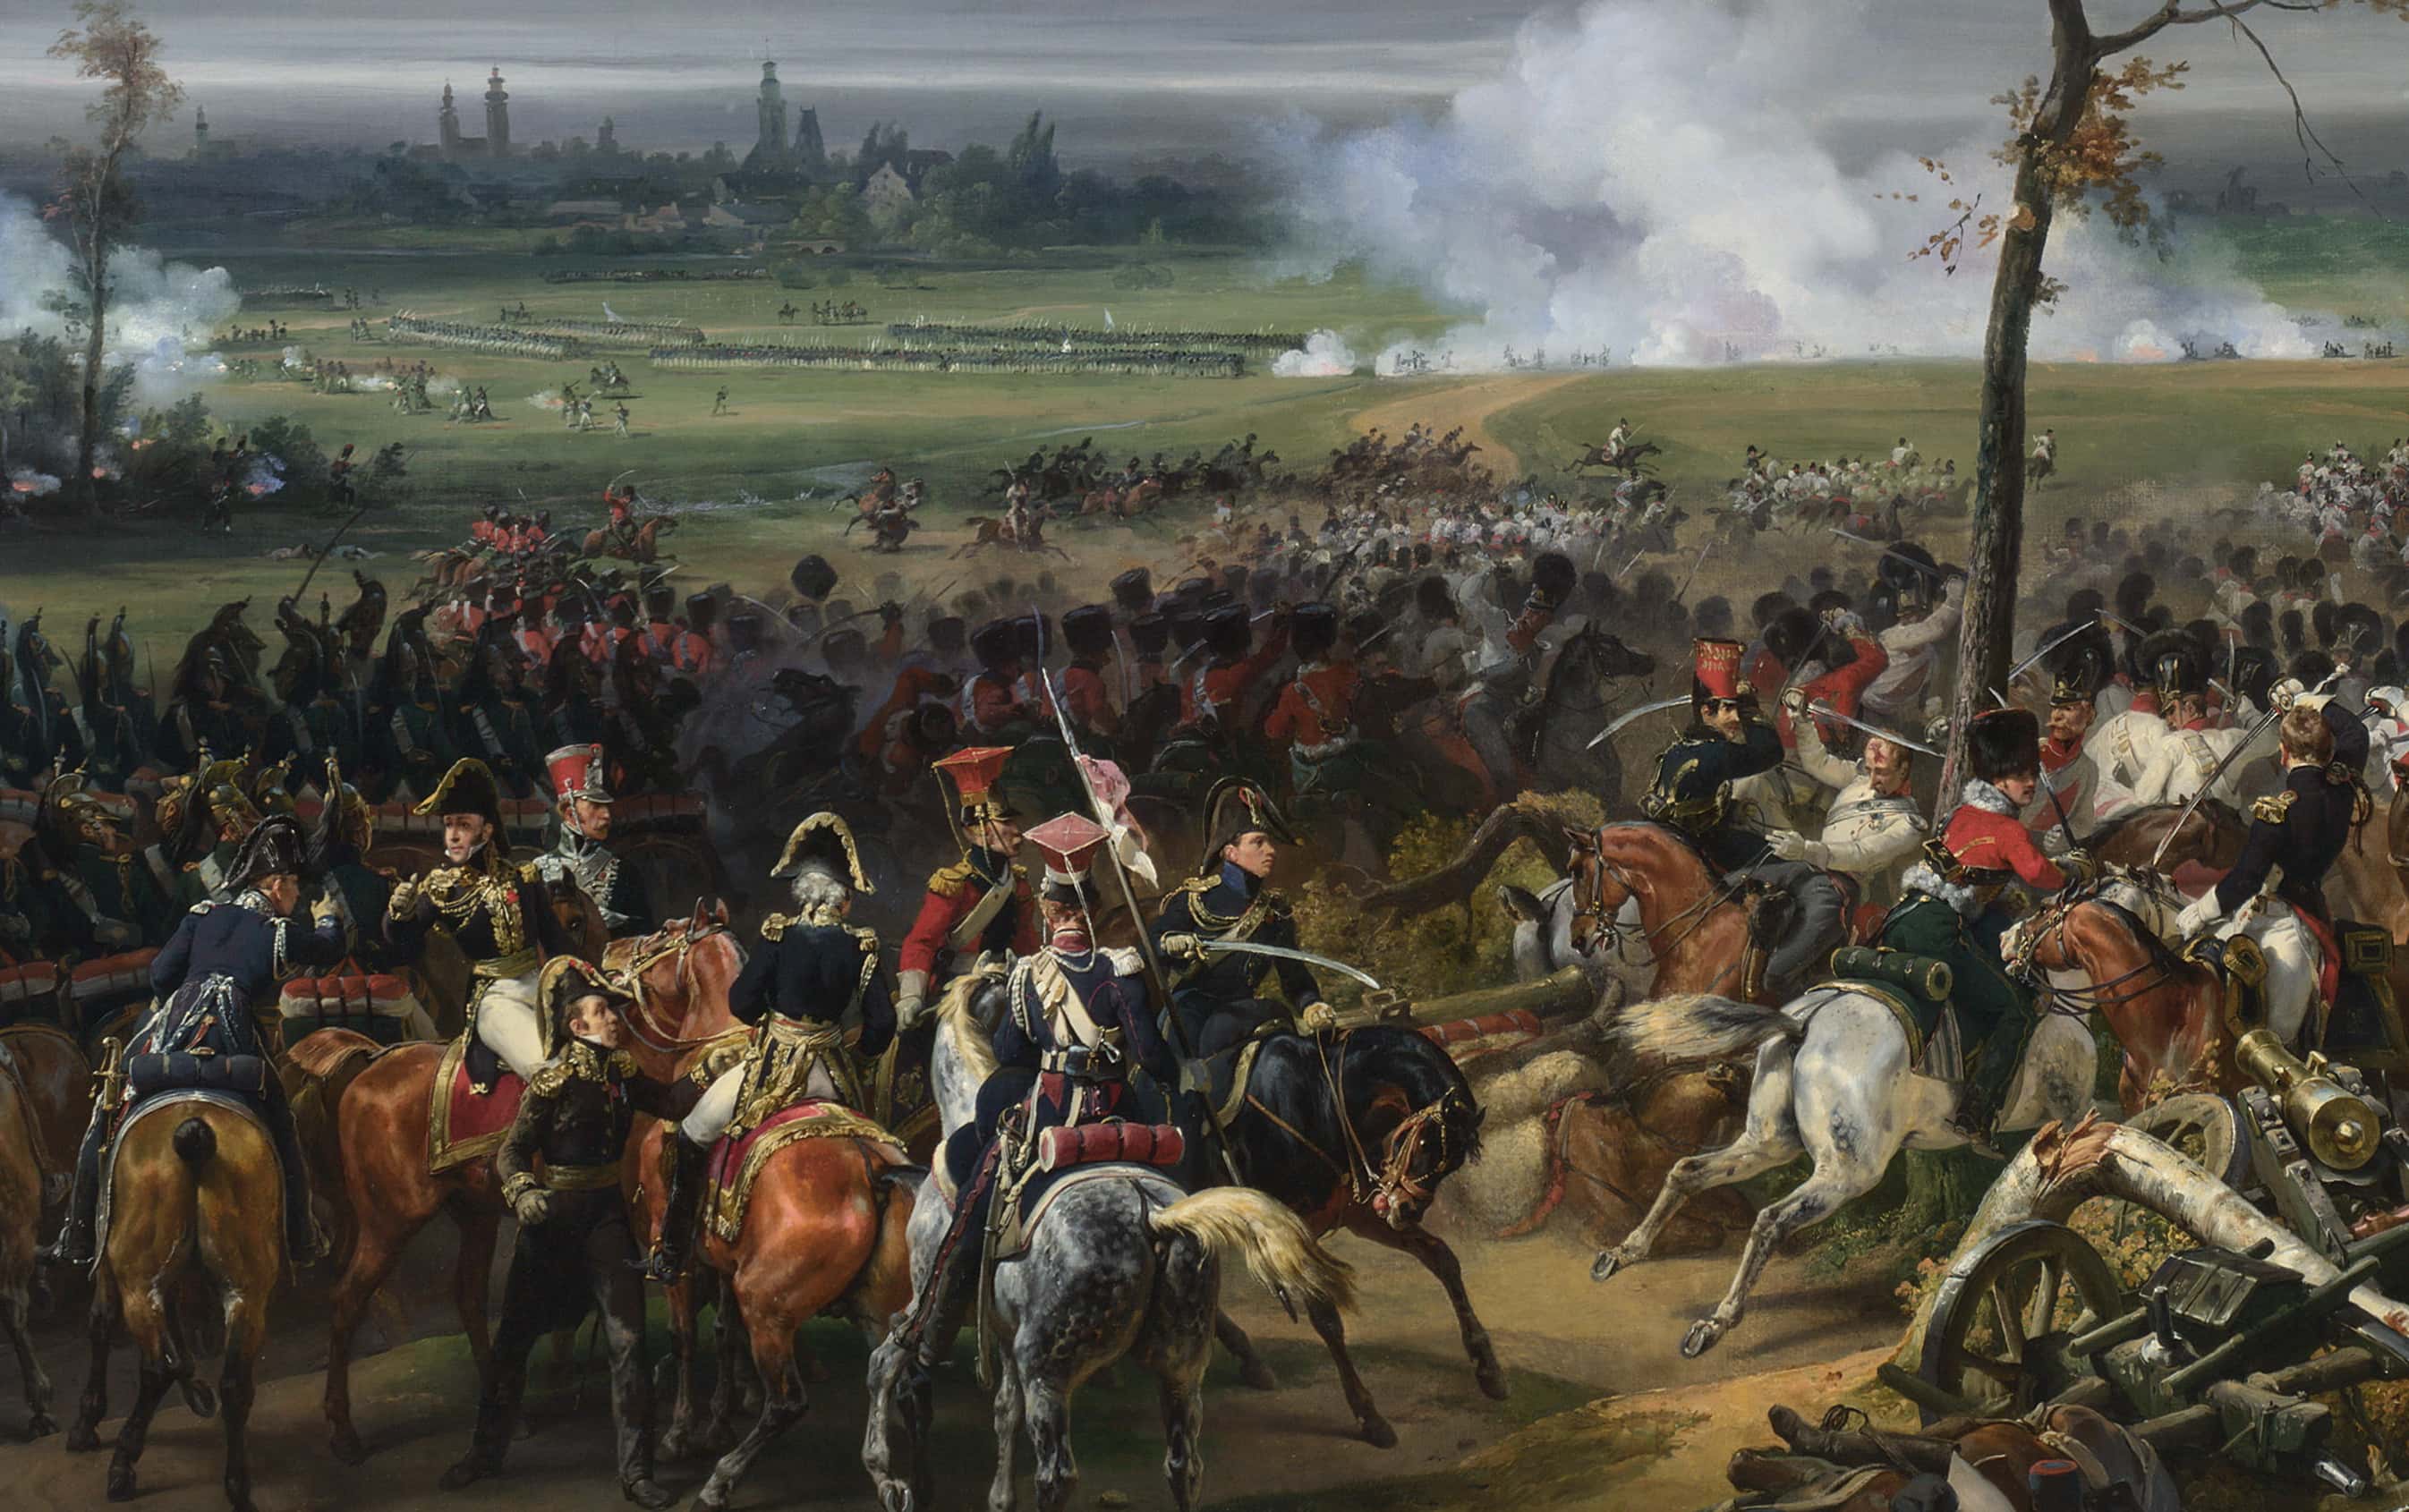 The Napoleonic Wars facts